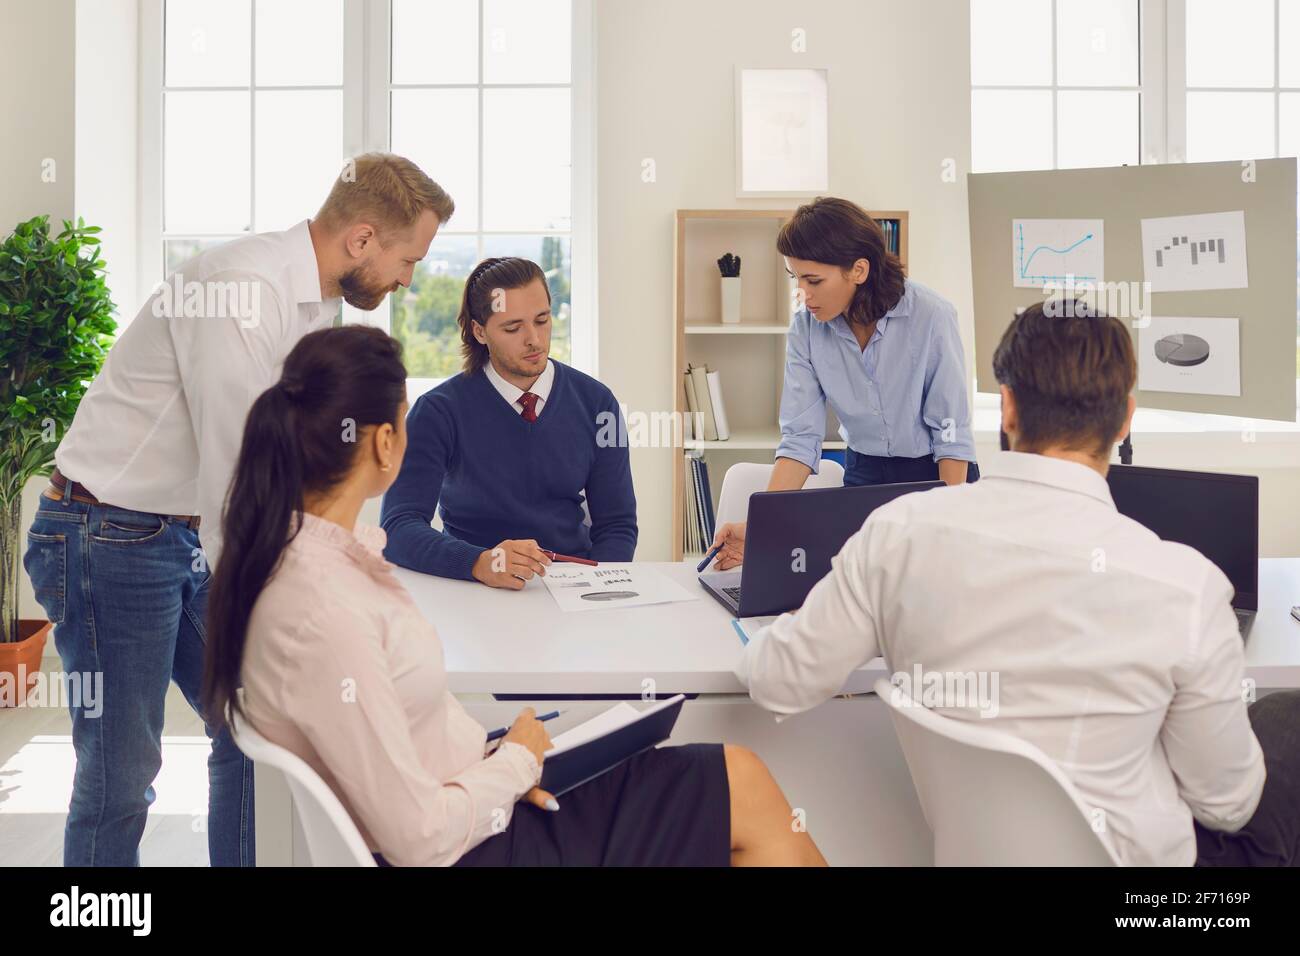 Department manager holding meeting with employees and analyzing financial reports in modern office Stock Photo